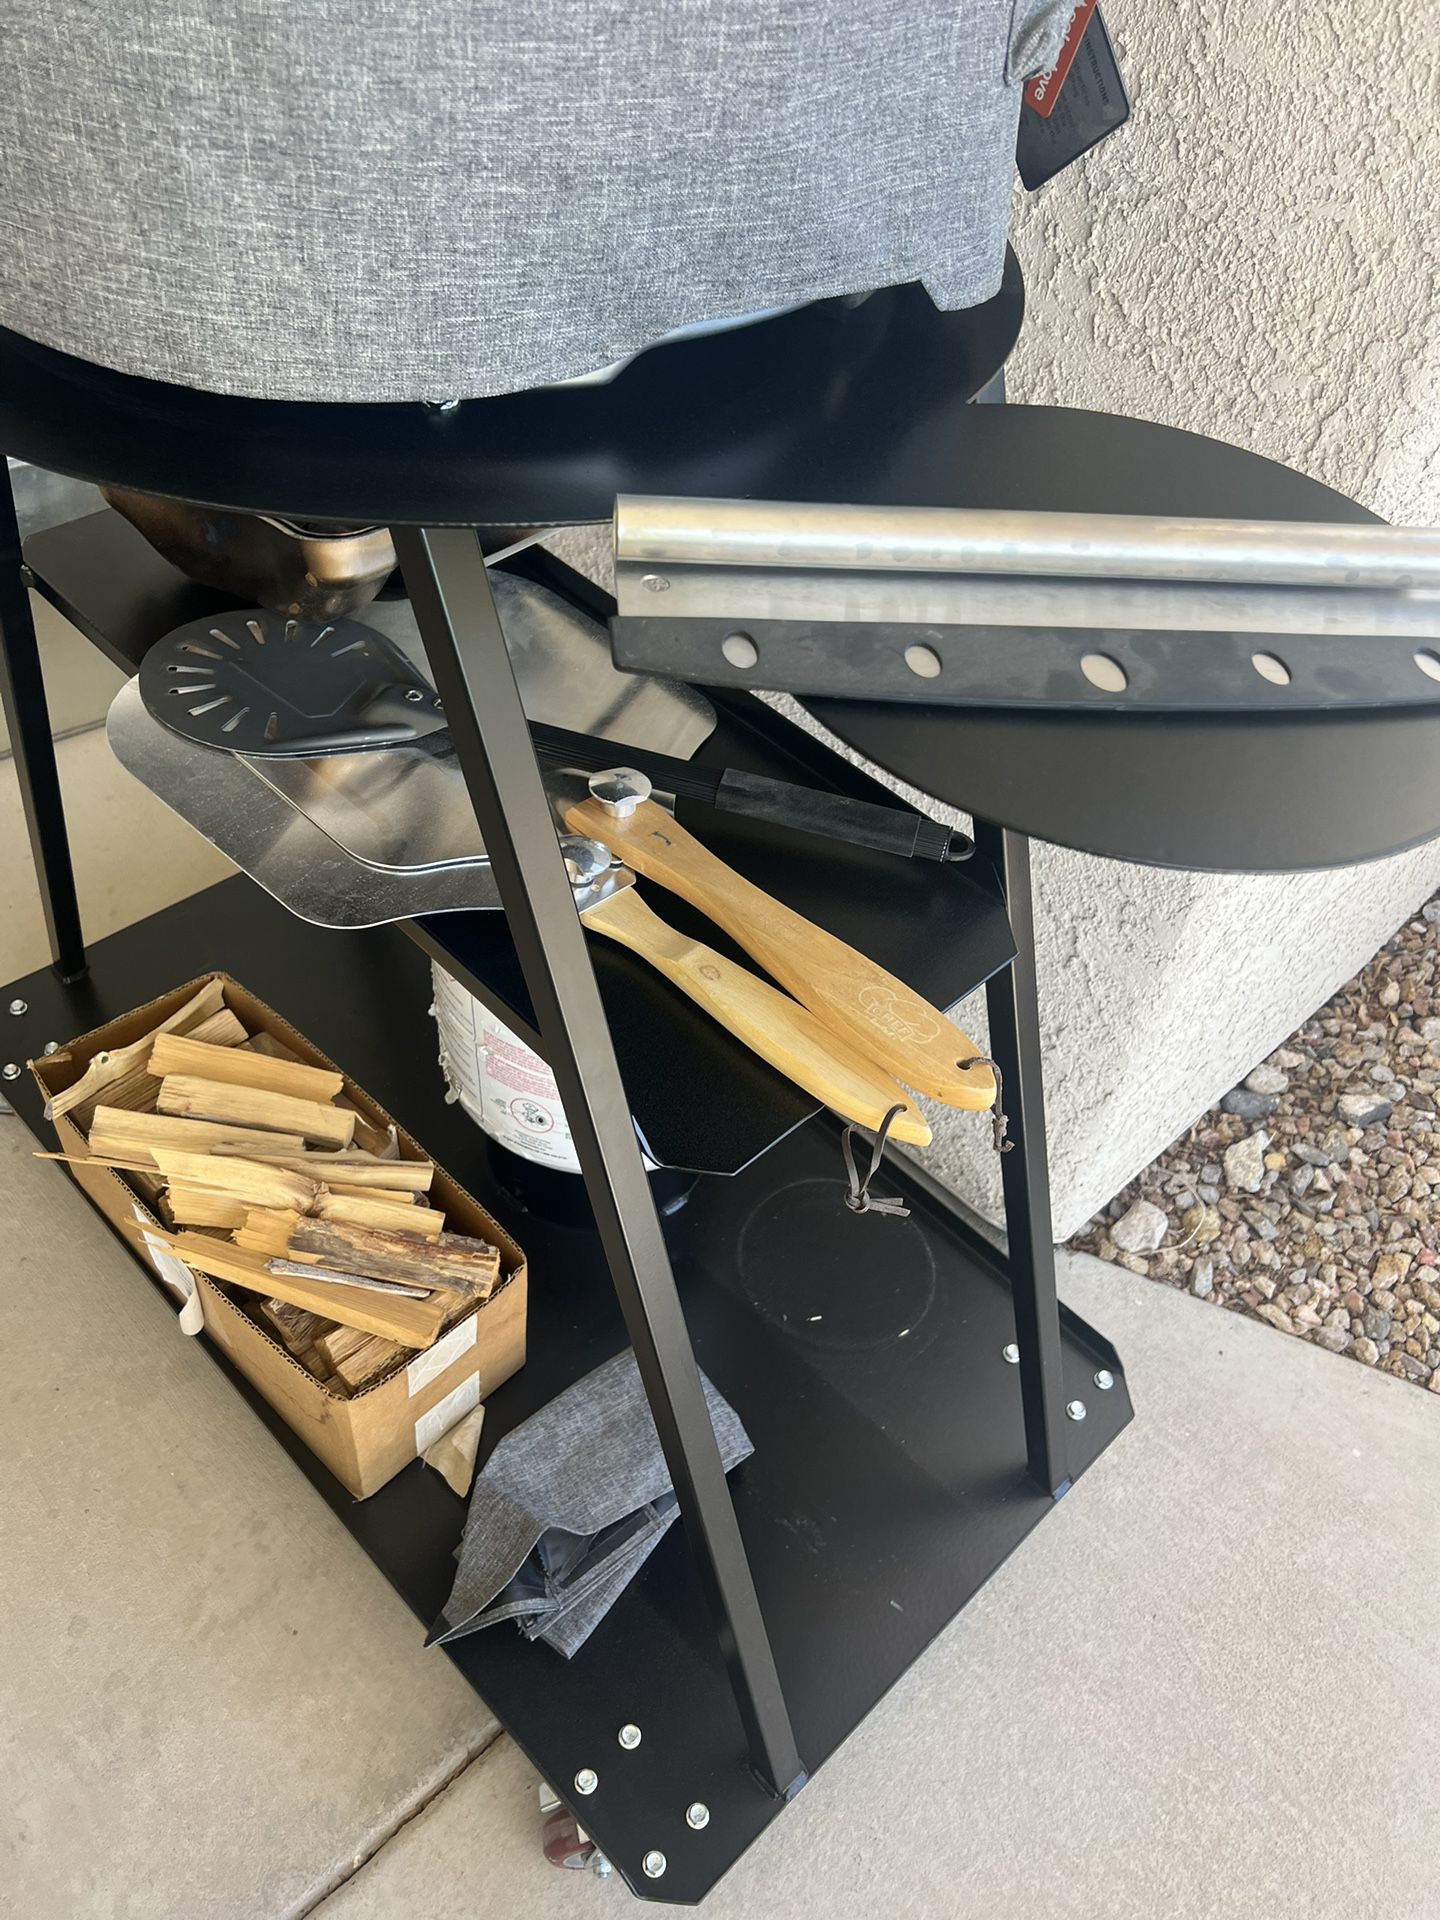 Black + Decker Pizza / Snack Oven P300S for Sale in Henderson, NV - OfferUp